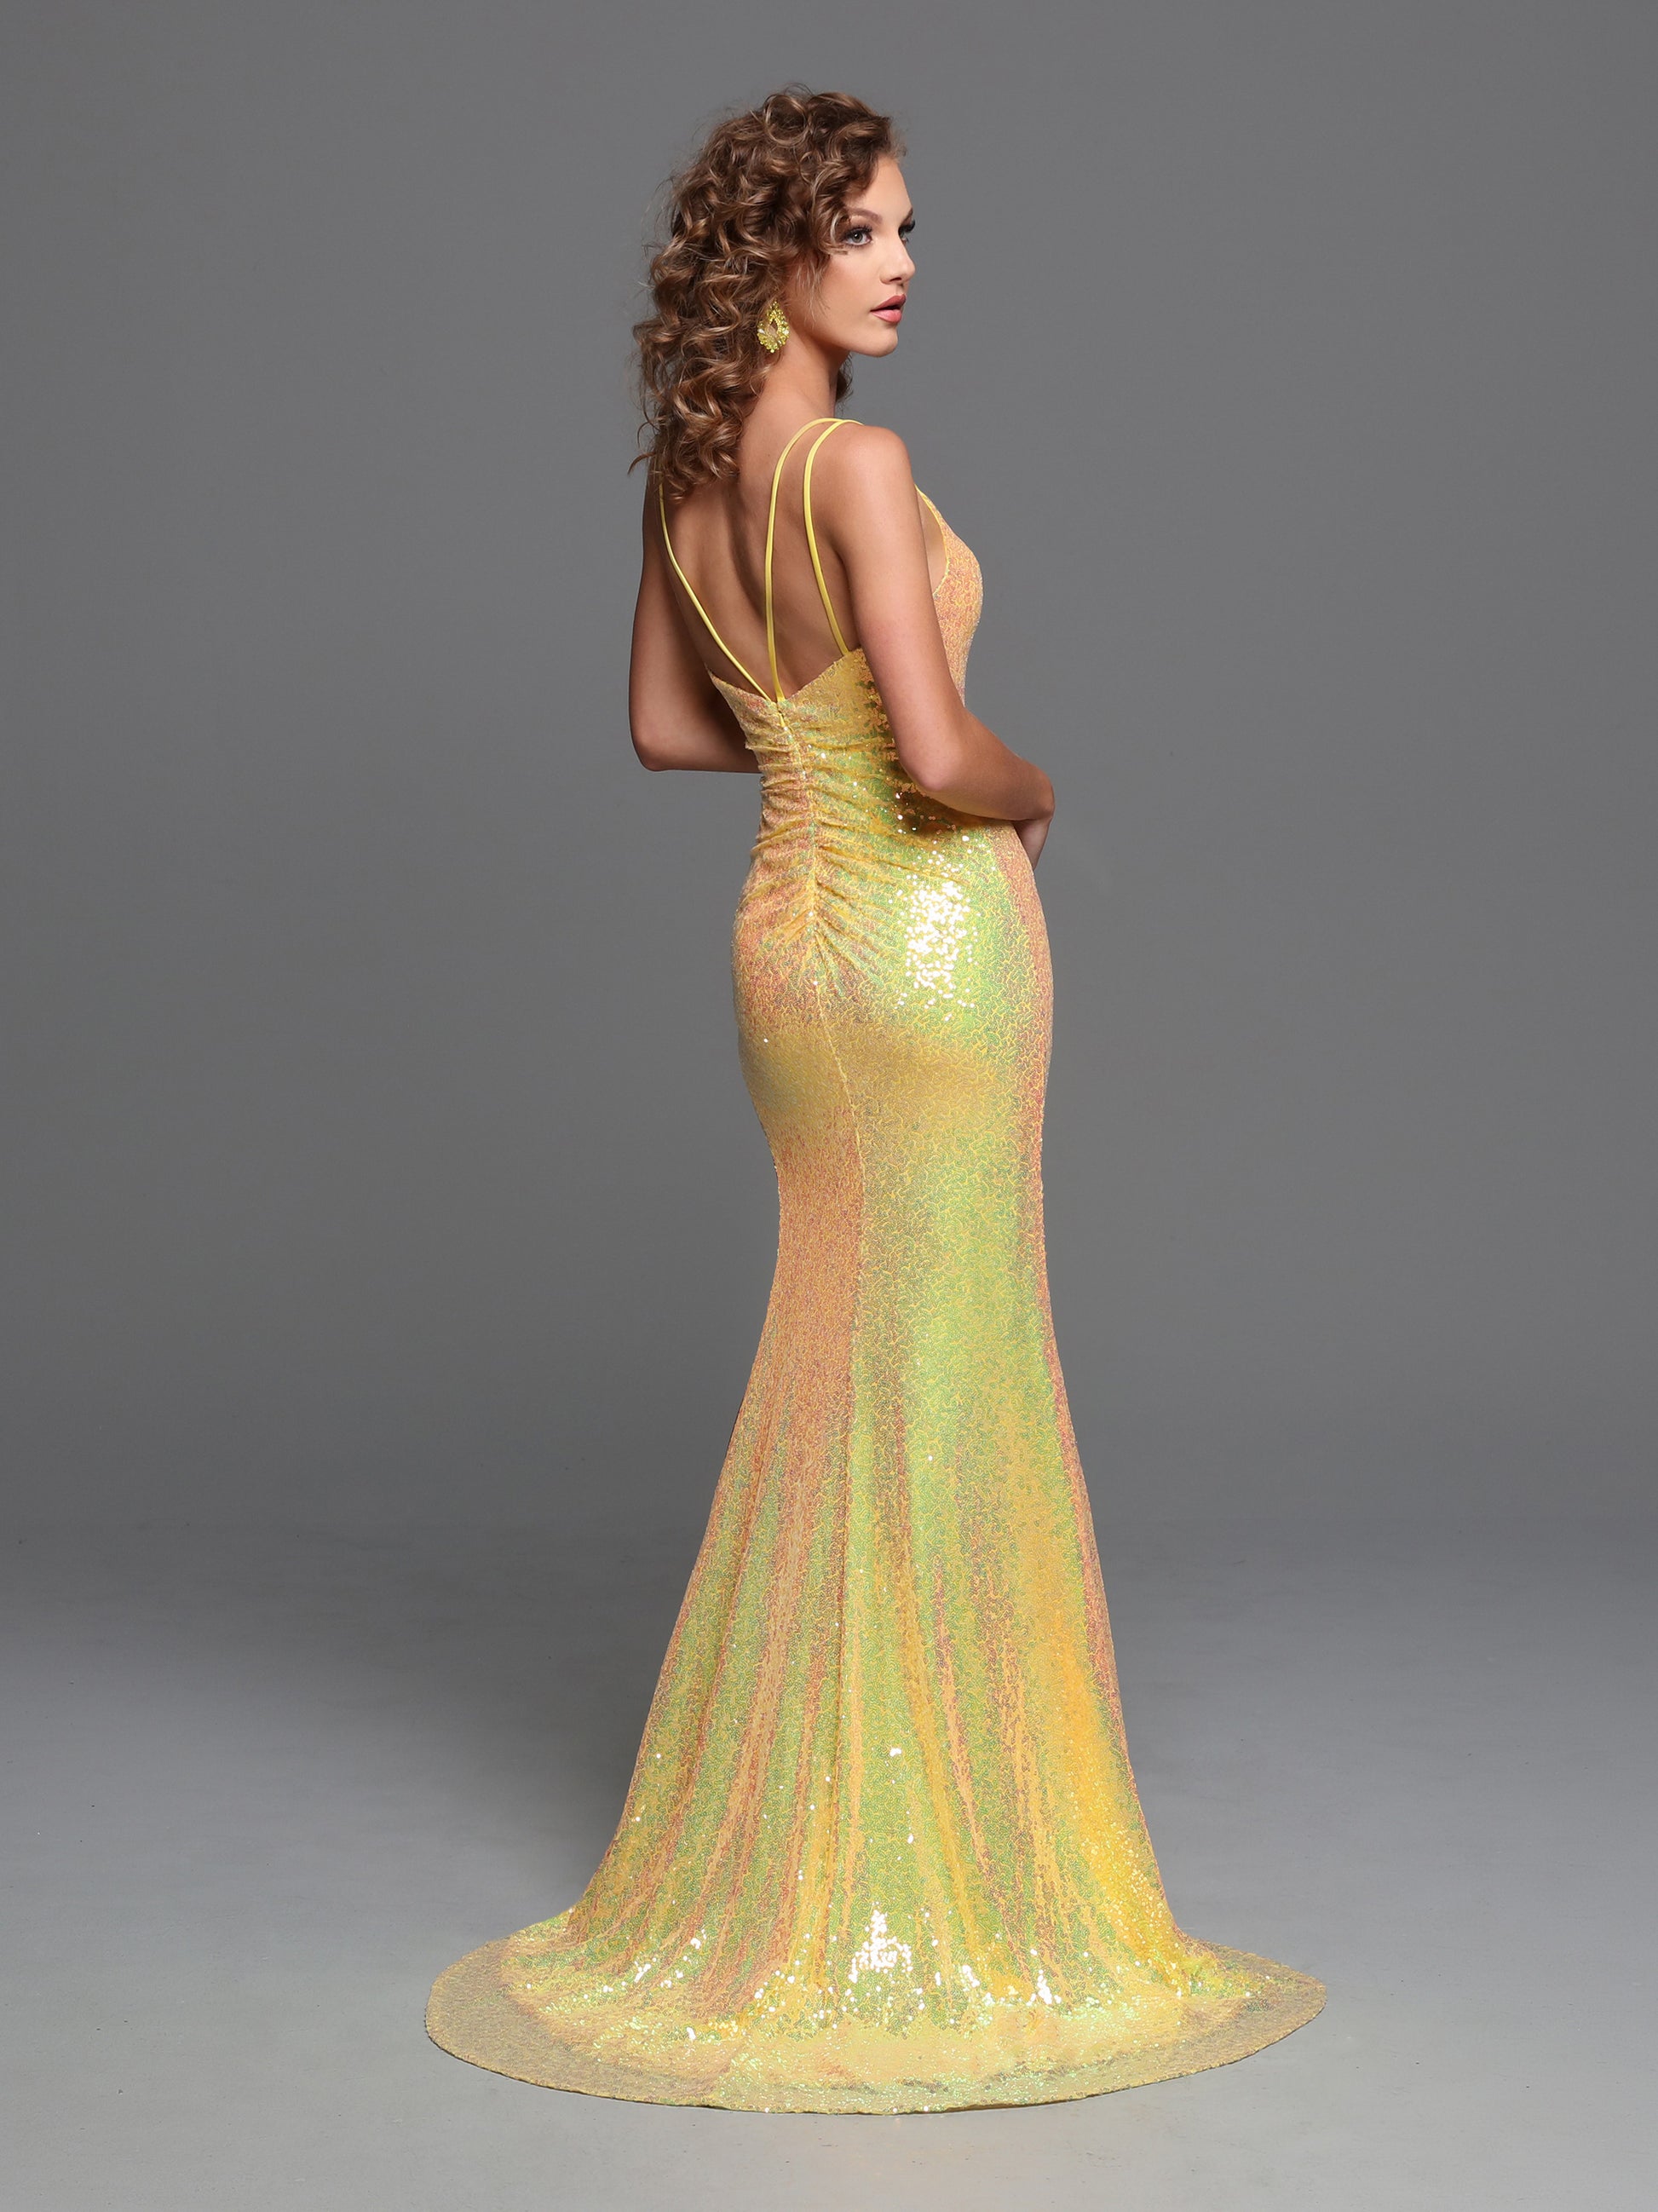 Sparkle Prom 72252 Long Fitted Sequin Prom Dress V Neck Slit Ruched Pageant Gown  Sizes: 0-20  Colors: Ice Blue, Neon Yellow